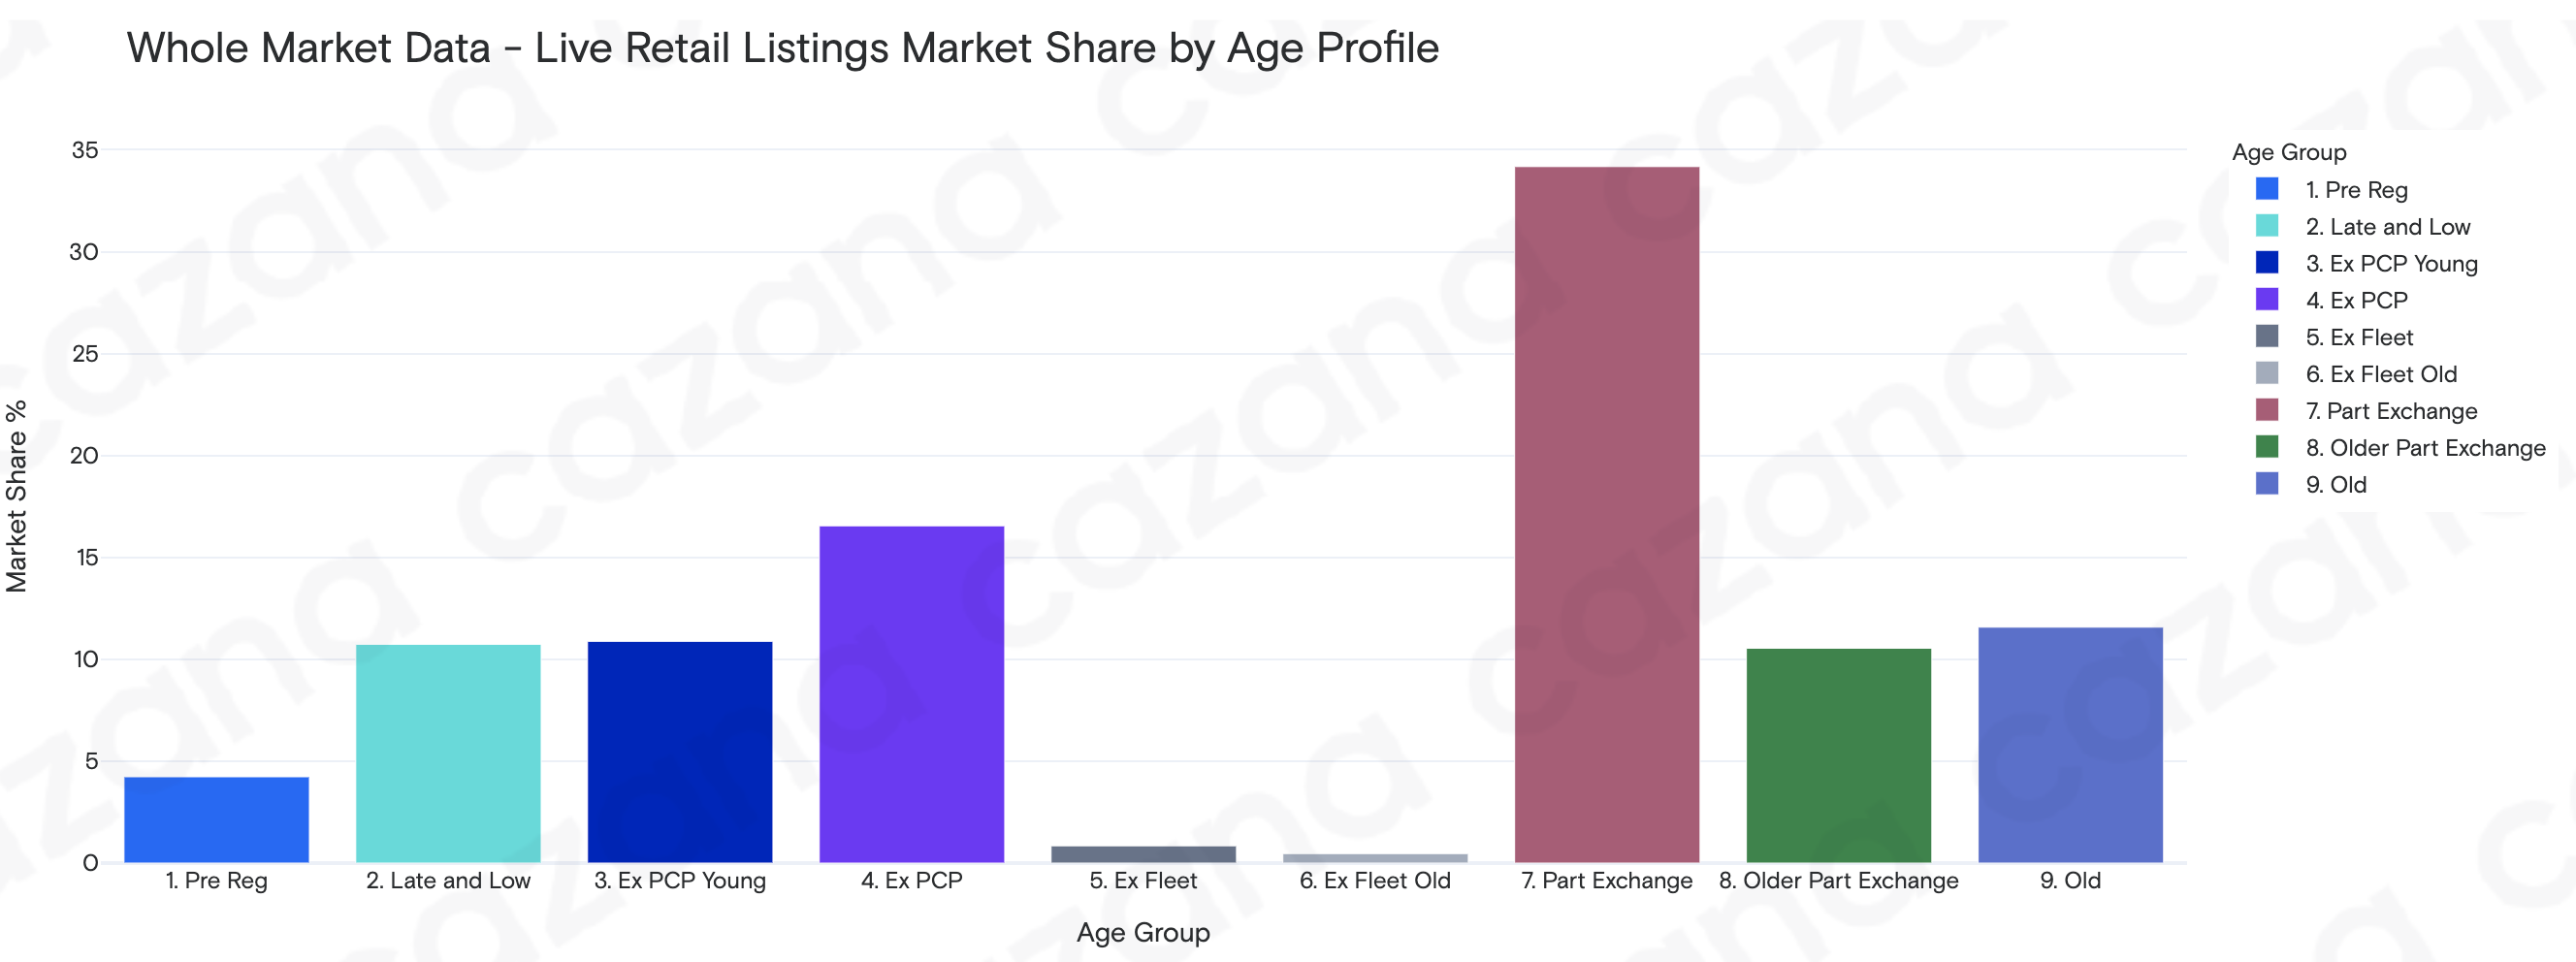 Live retail listings market share by age profile - 10.08.21